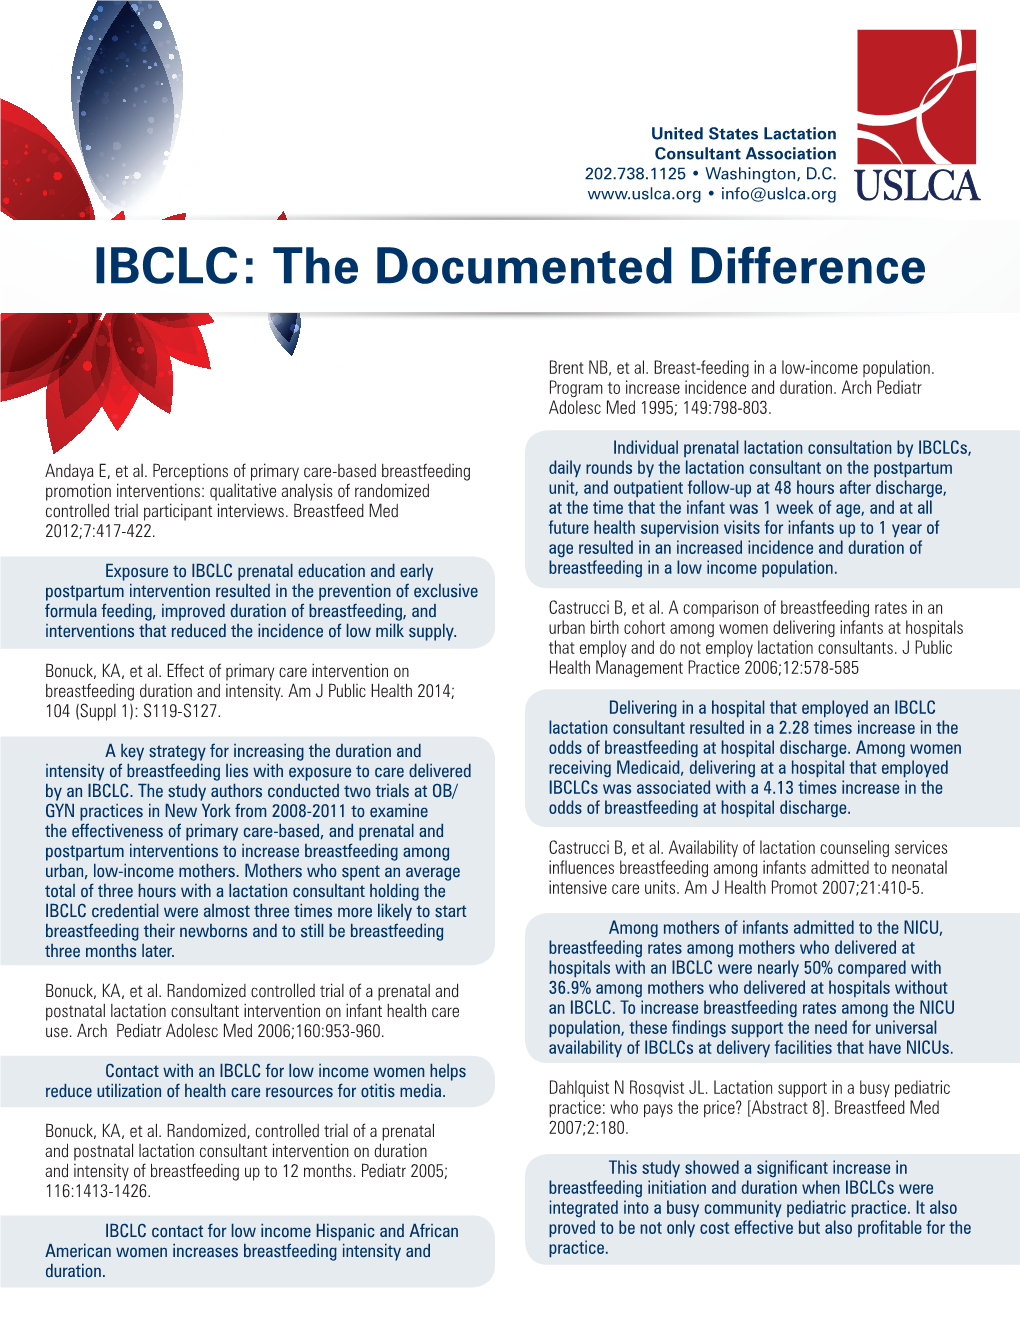 IBCLC: the Documented Difference